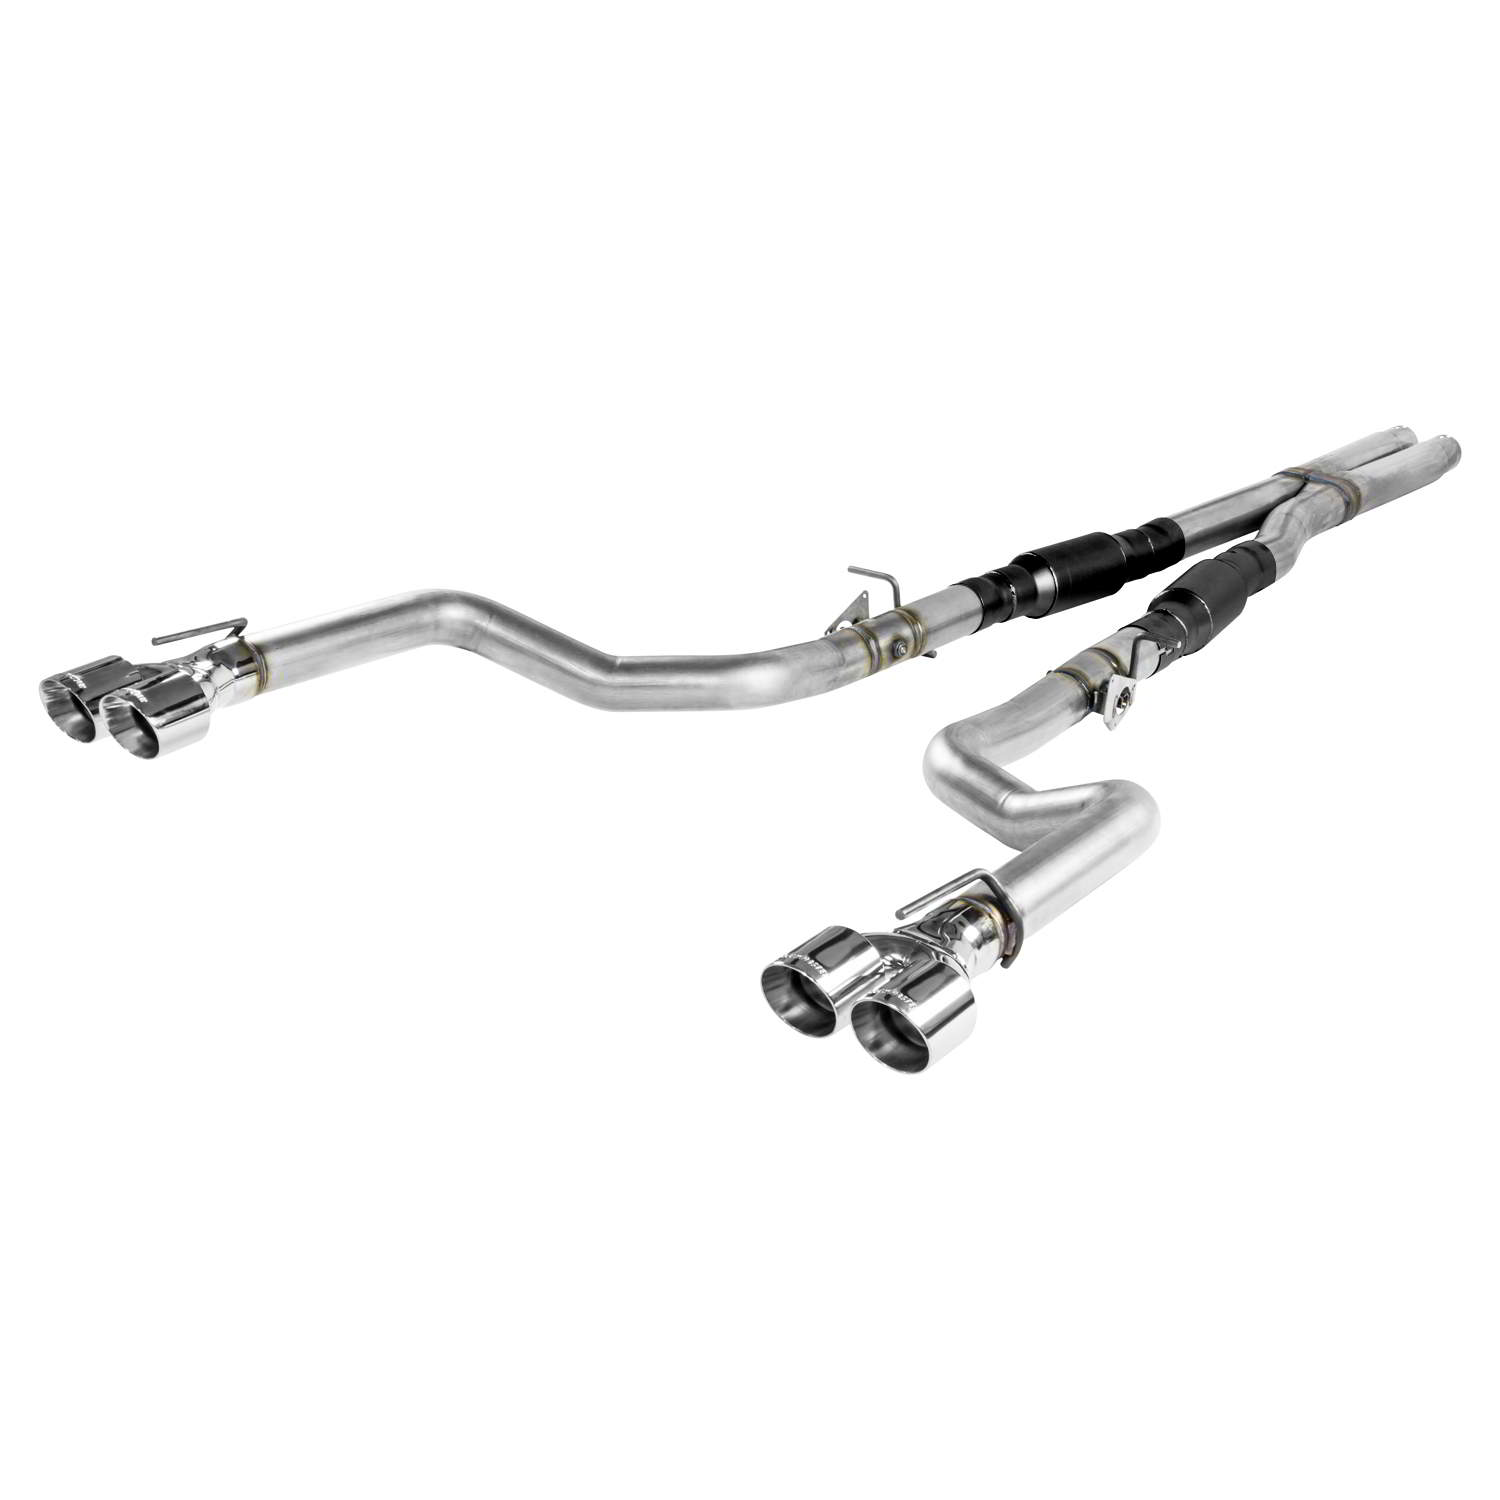 2017 Dodge Challenger R/T 5.7L Flowmaster 409S Outlaw Catback Exhaust System